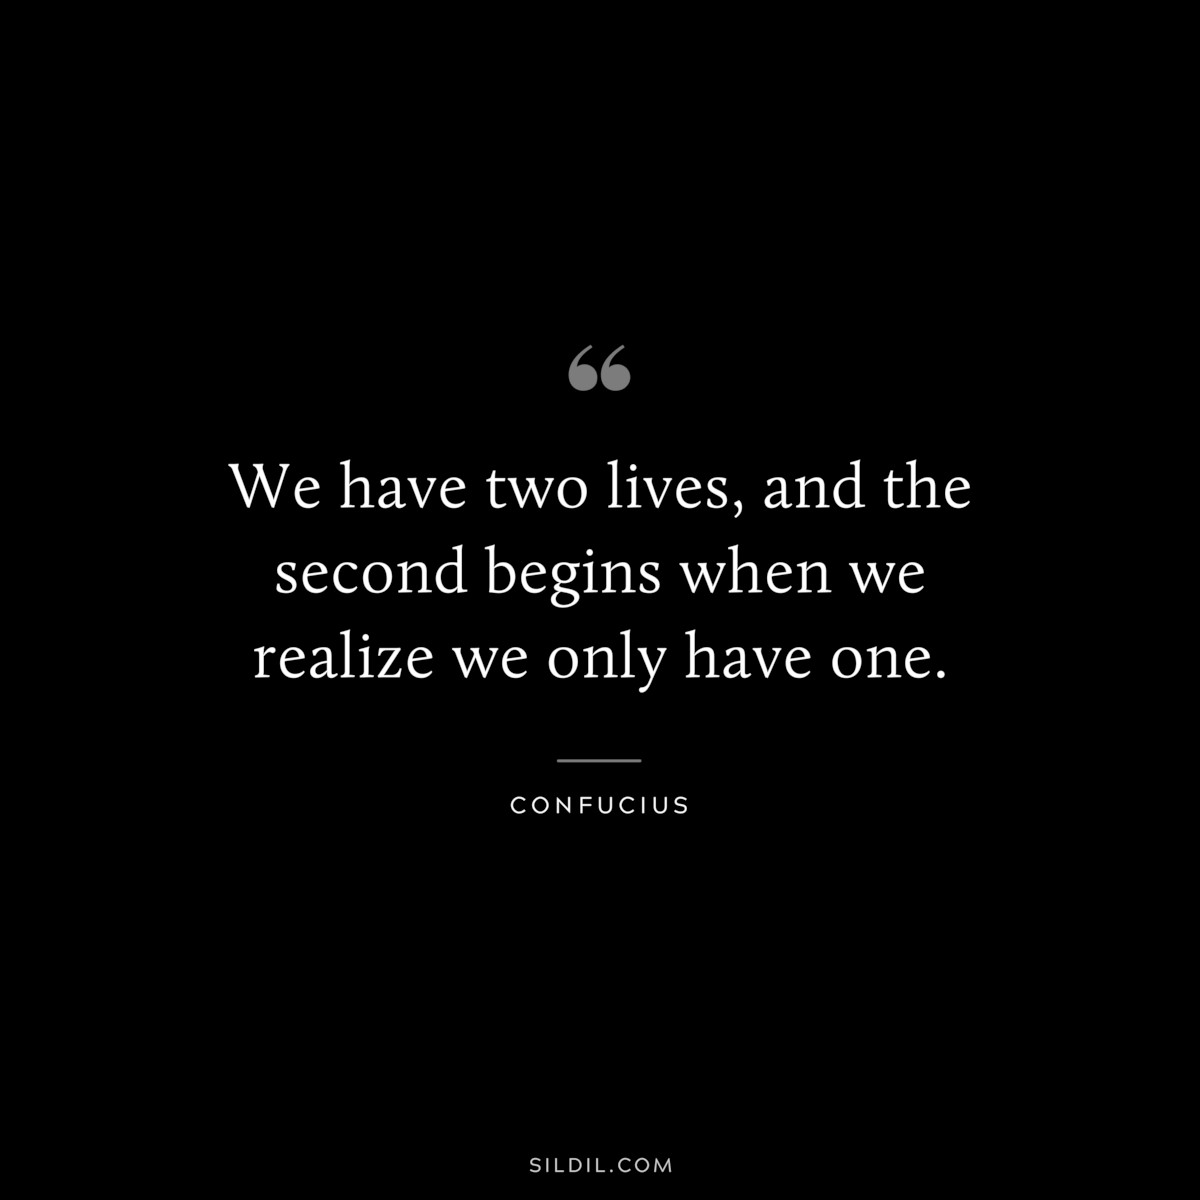 We have two lives, and the second begins when we realize we only have one. ― Confucius